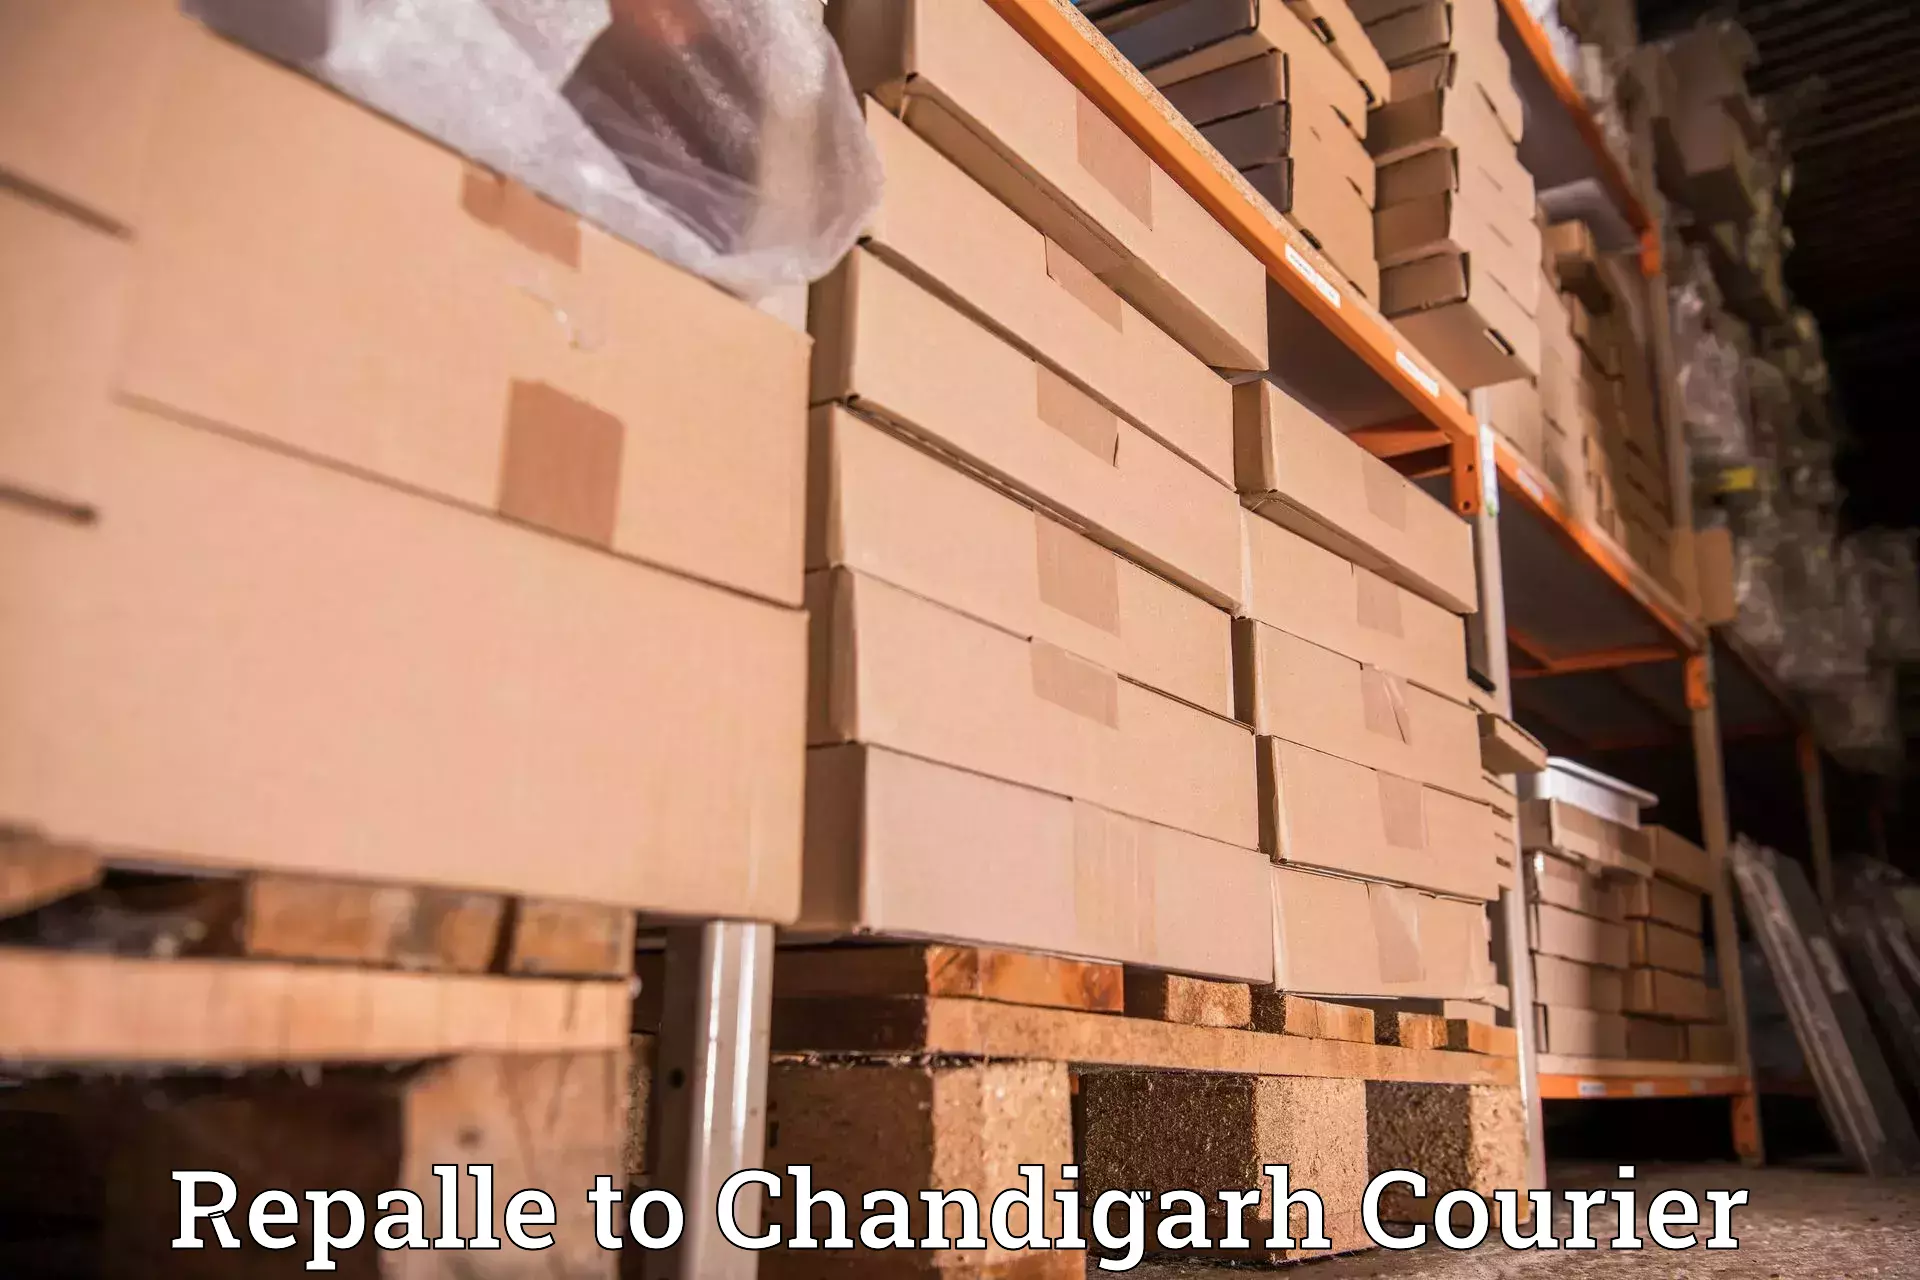 24-hour courier services Repalle to Chandigarh